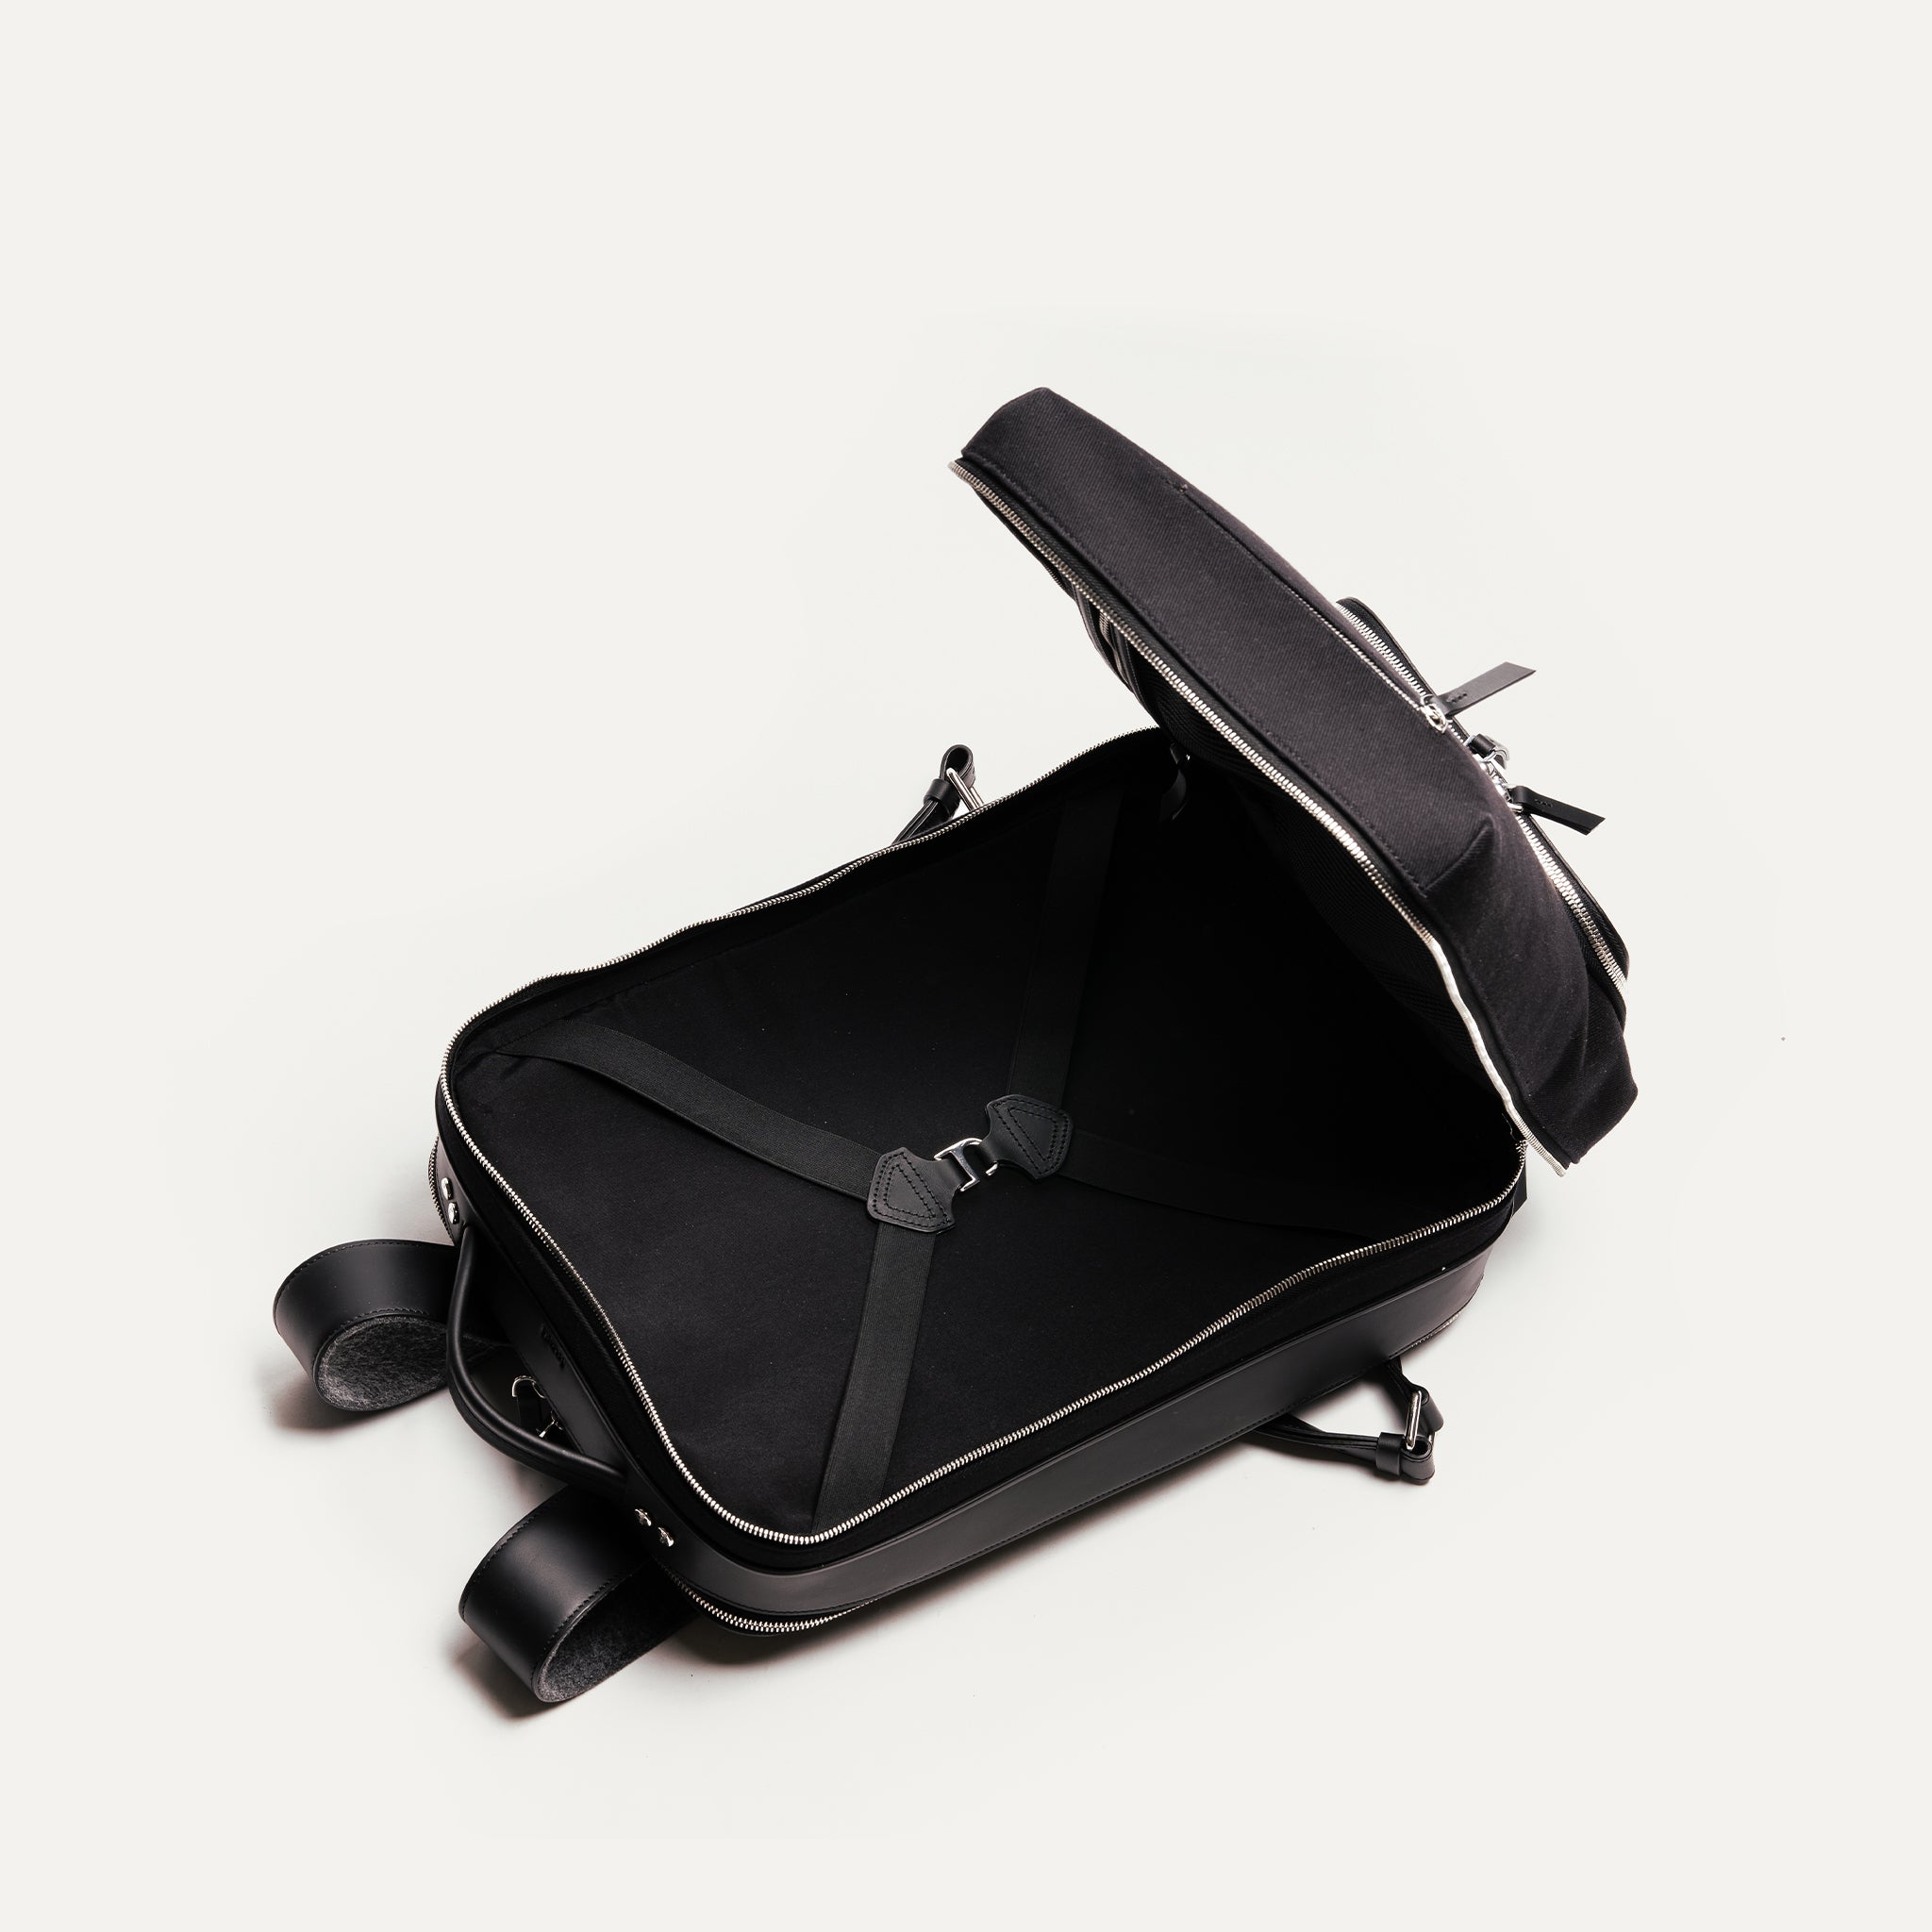 ANTOINE, Black | lundi 36-hour Backpack in cotton and leather